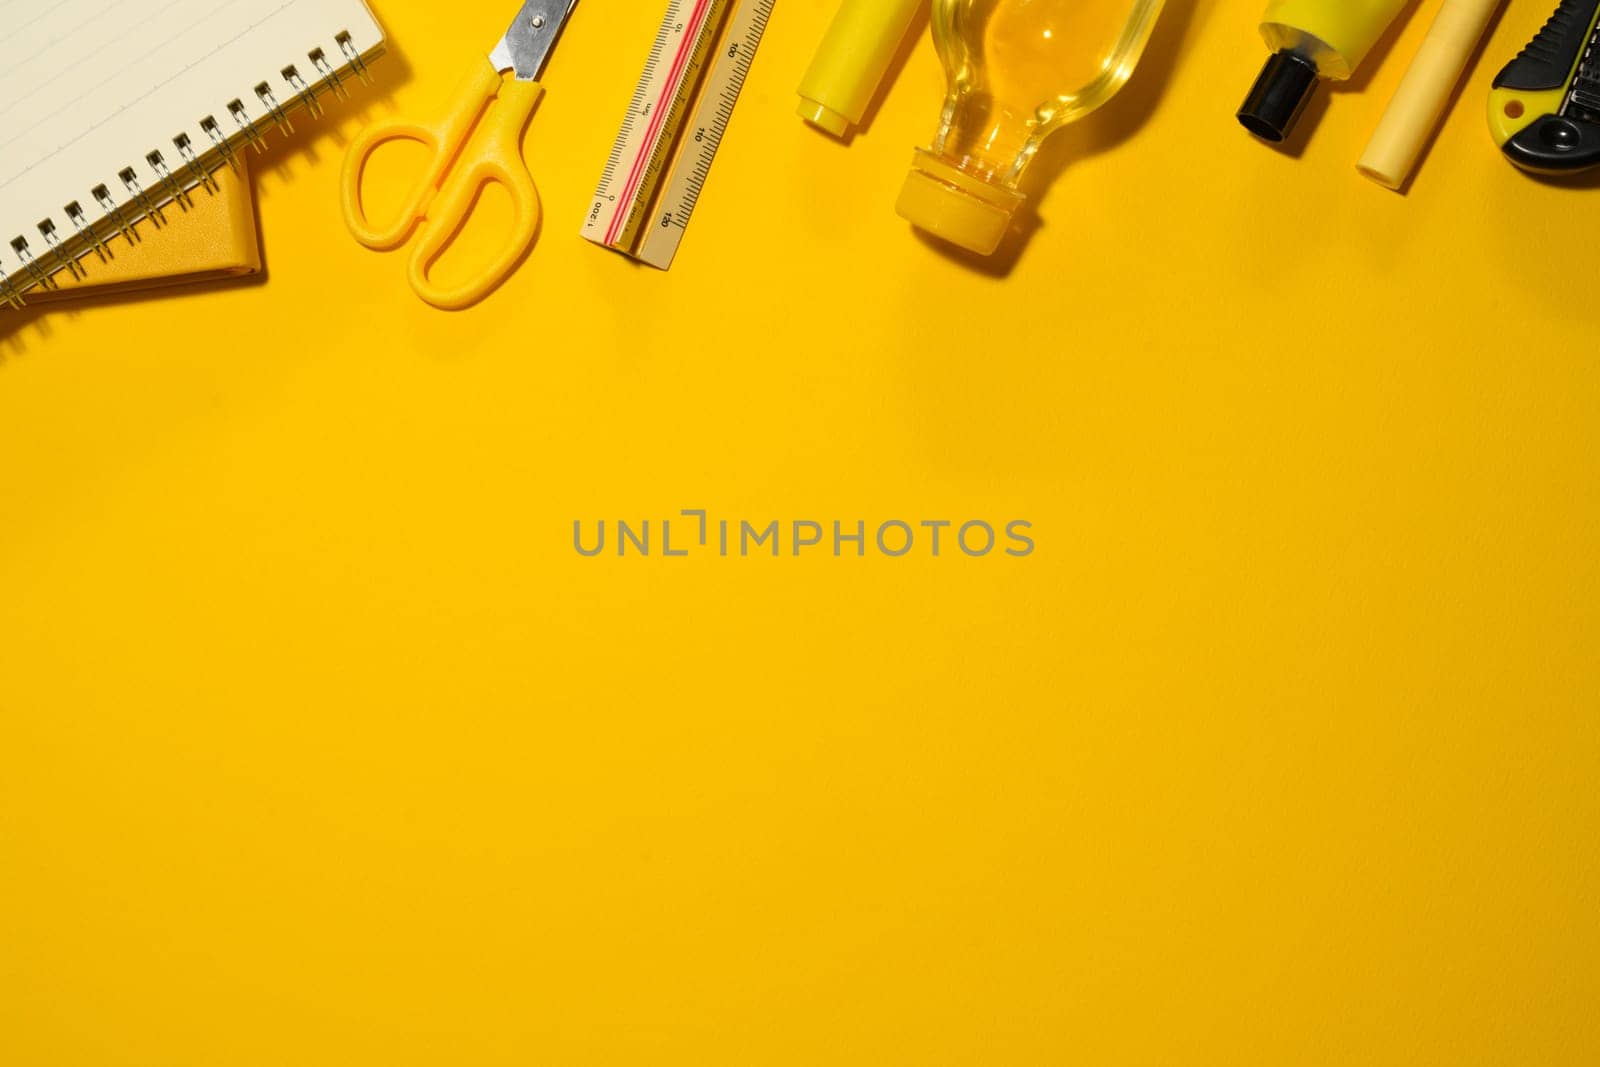 Various office and school supplies on yellow background. Flat lay, top view with copy space.